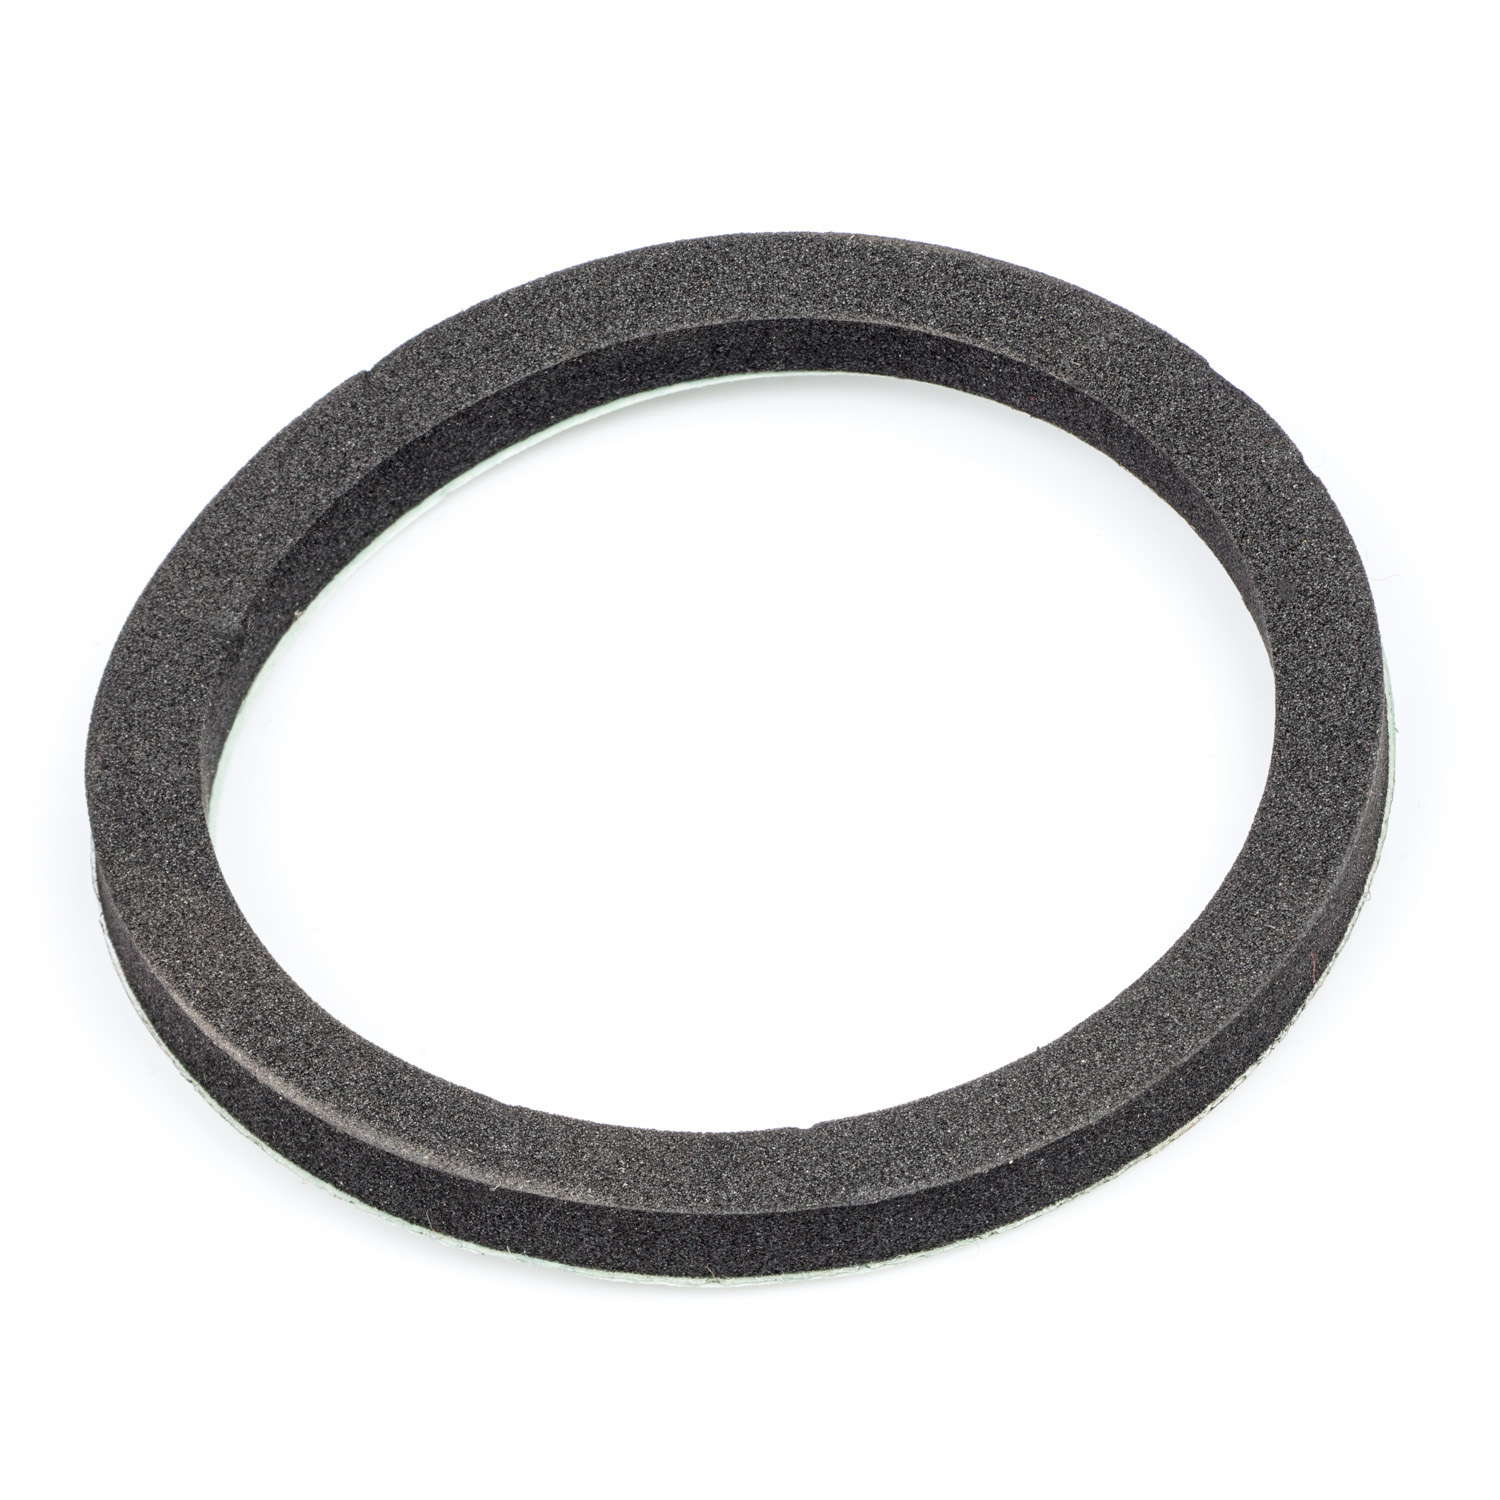 RZ500 Airbox Joint Gasket